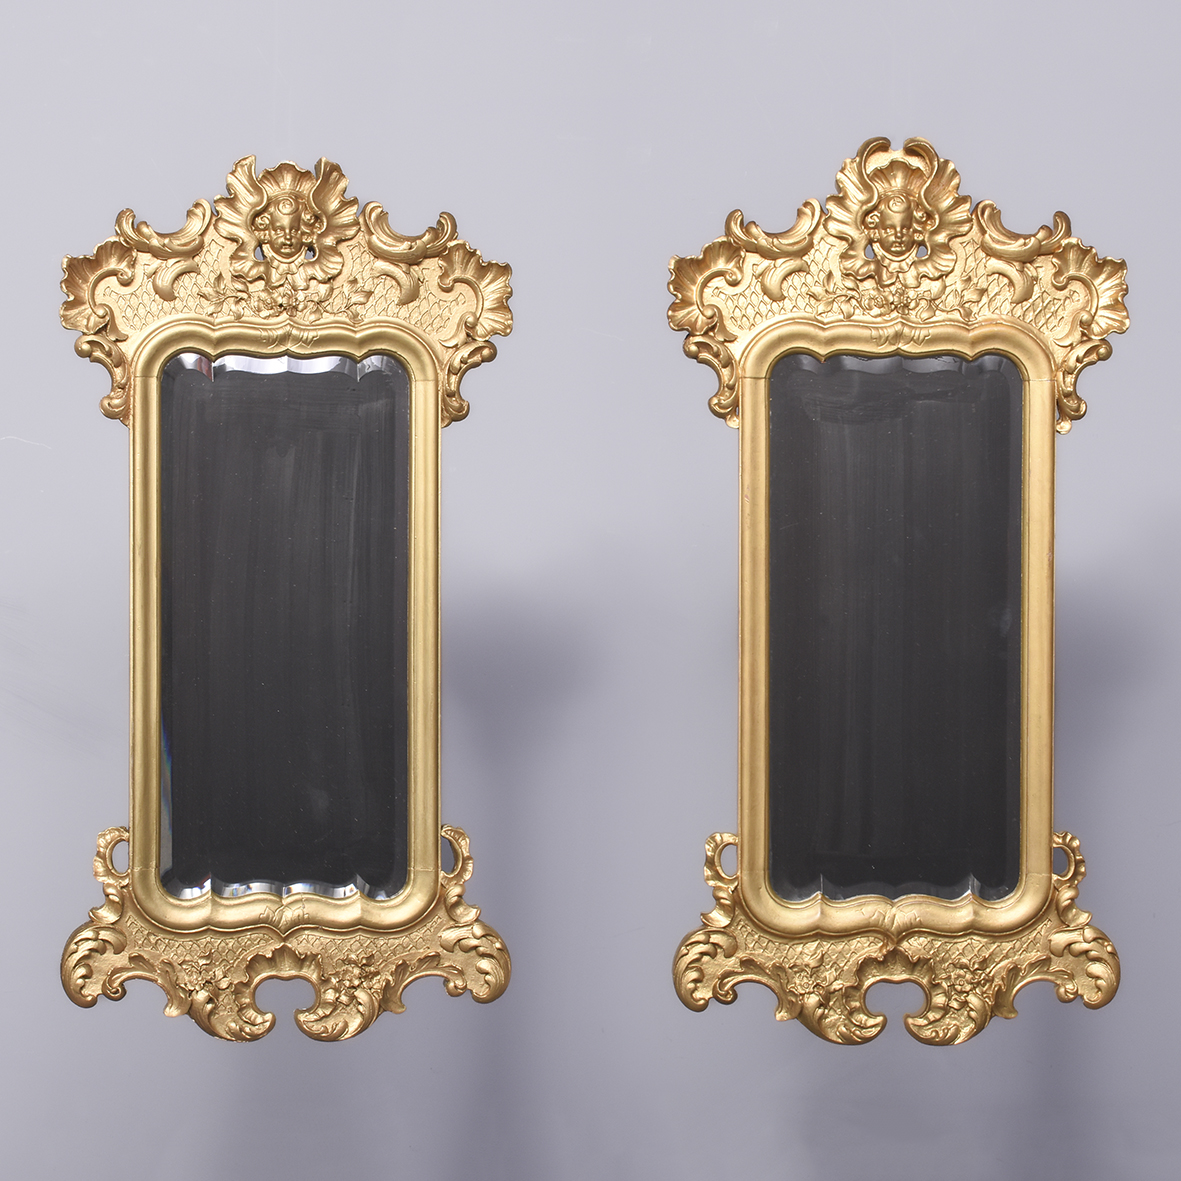 Rare Pair of Gilded Bevel-Edged Mid-Victorian Wall Mirrors Antique Mirrors